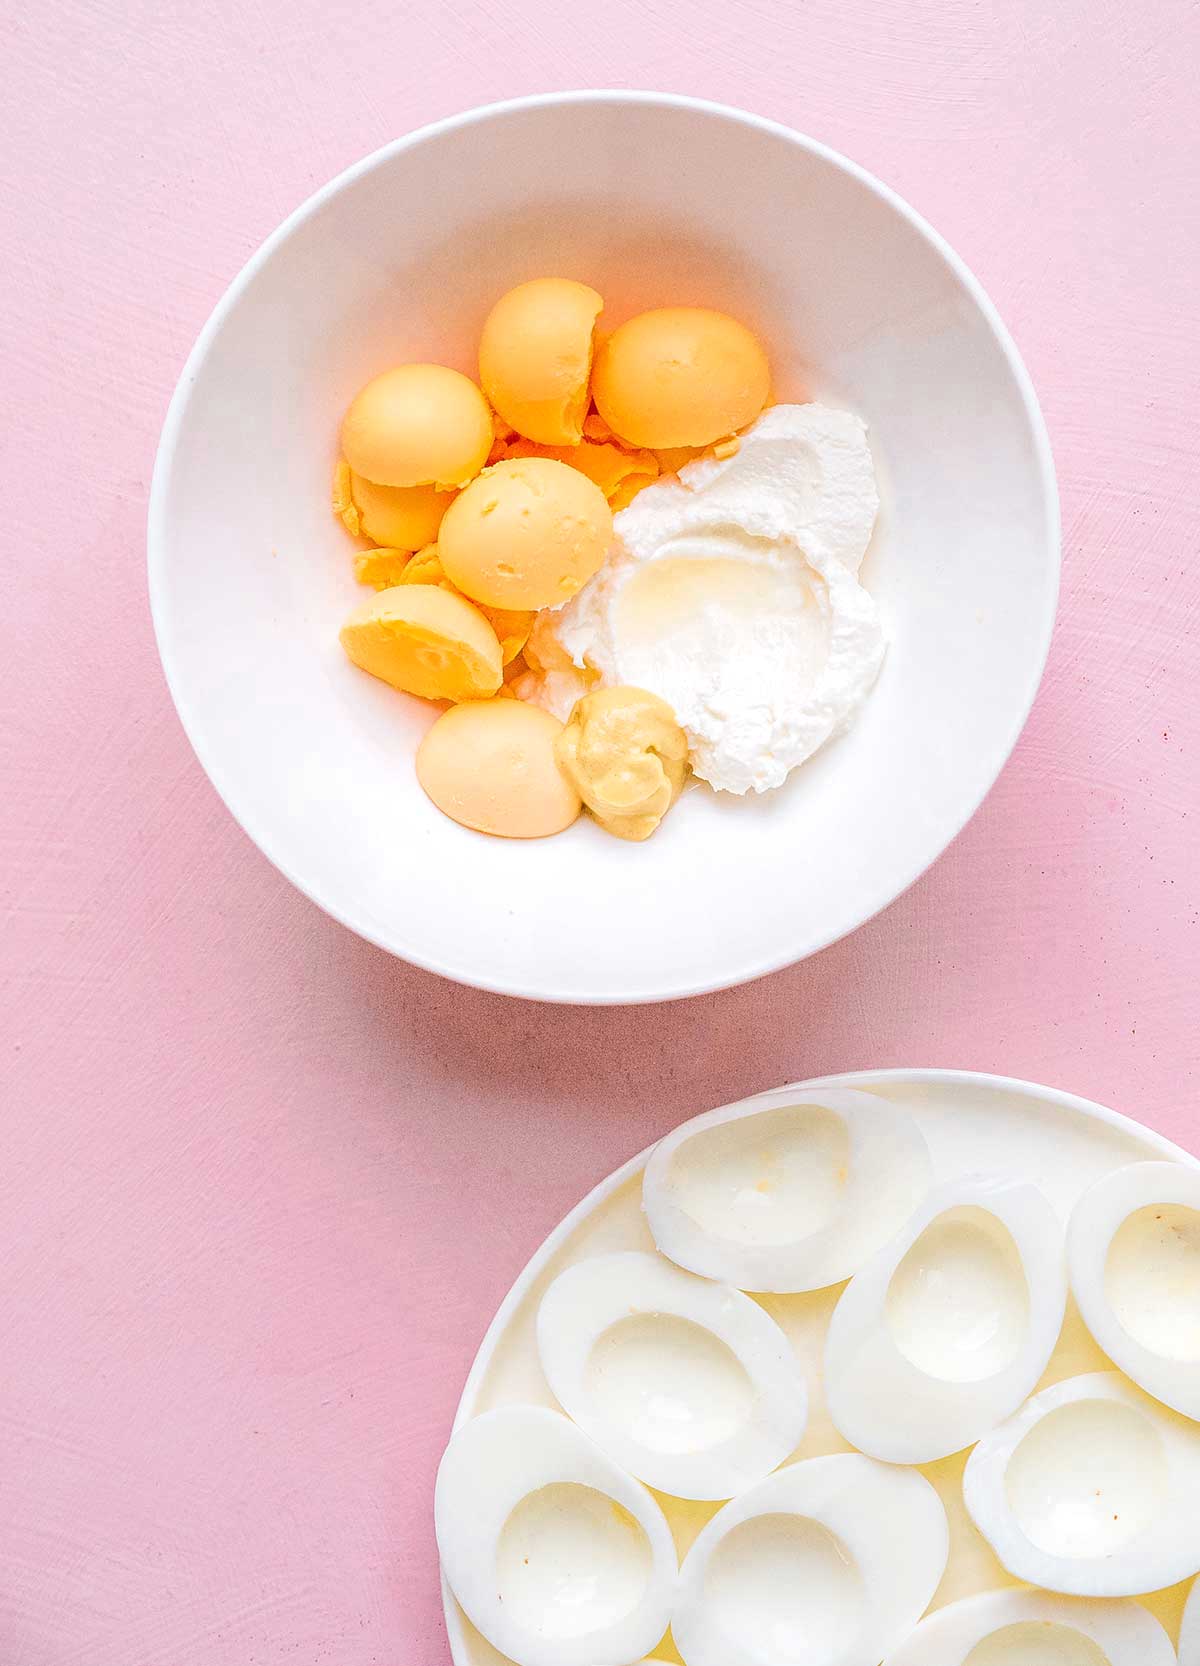 A bowl filled with egg yolks and Greek yogurt next to a plate filled with egg white halves